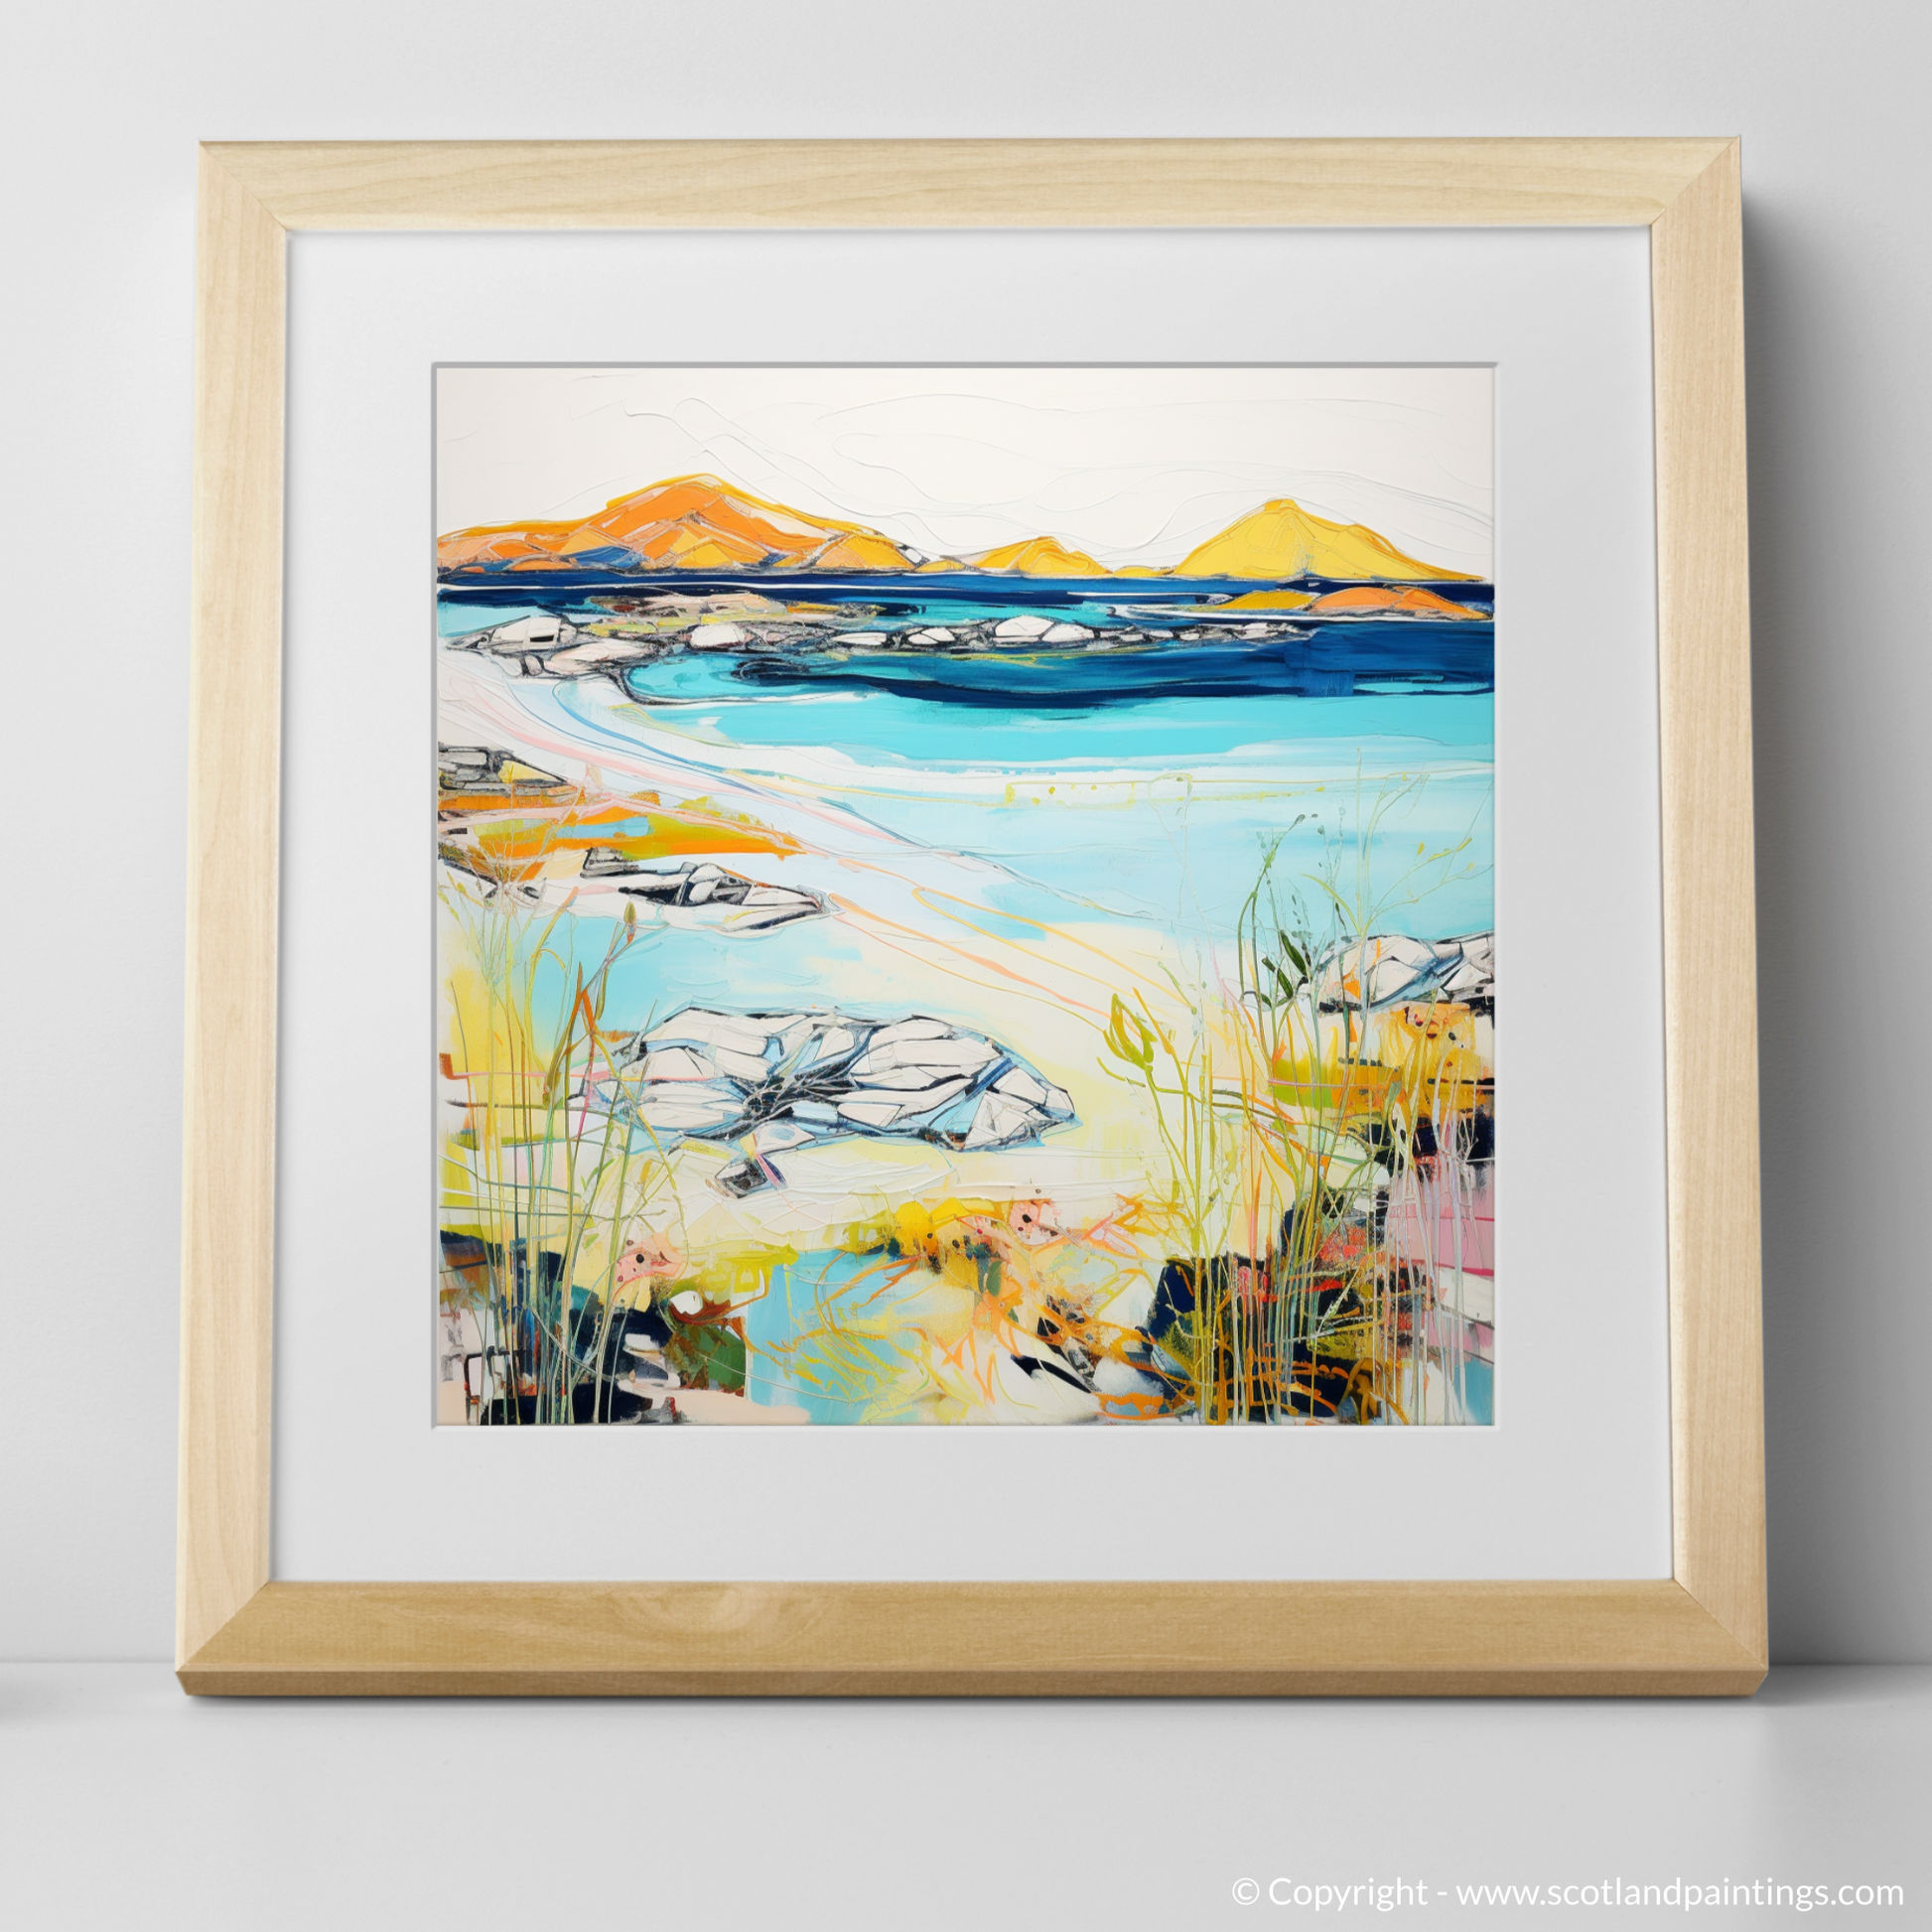 Art Print of Isle of Barra with a natural frame